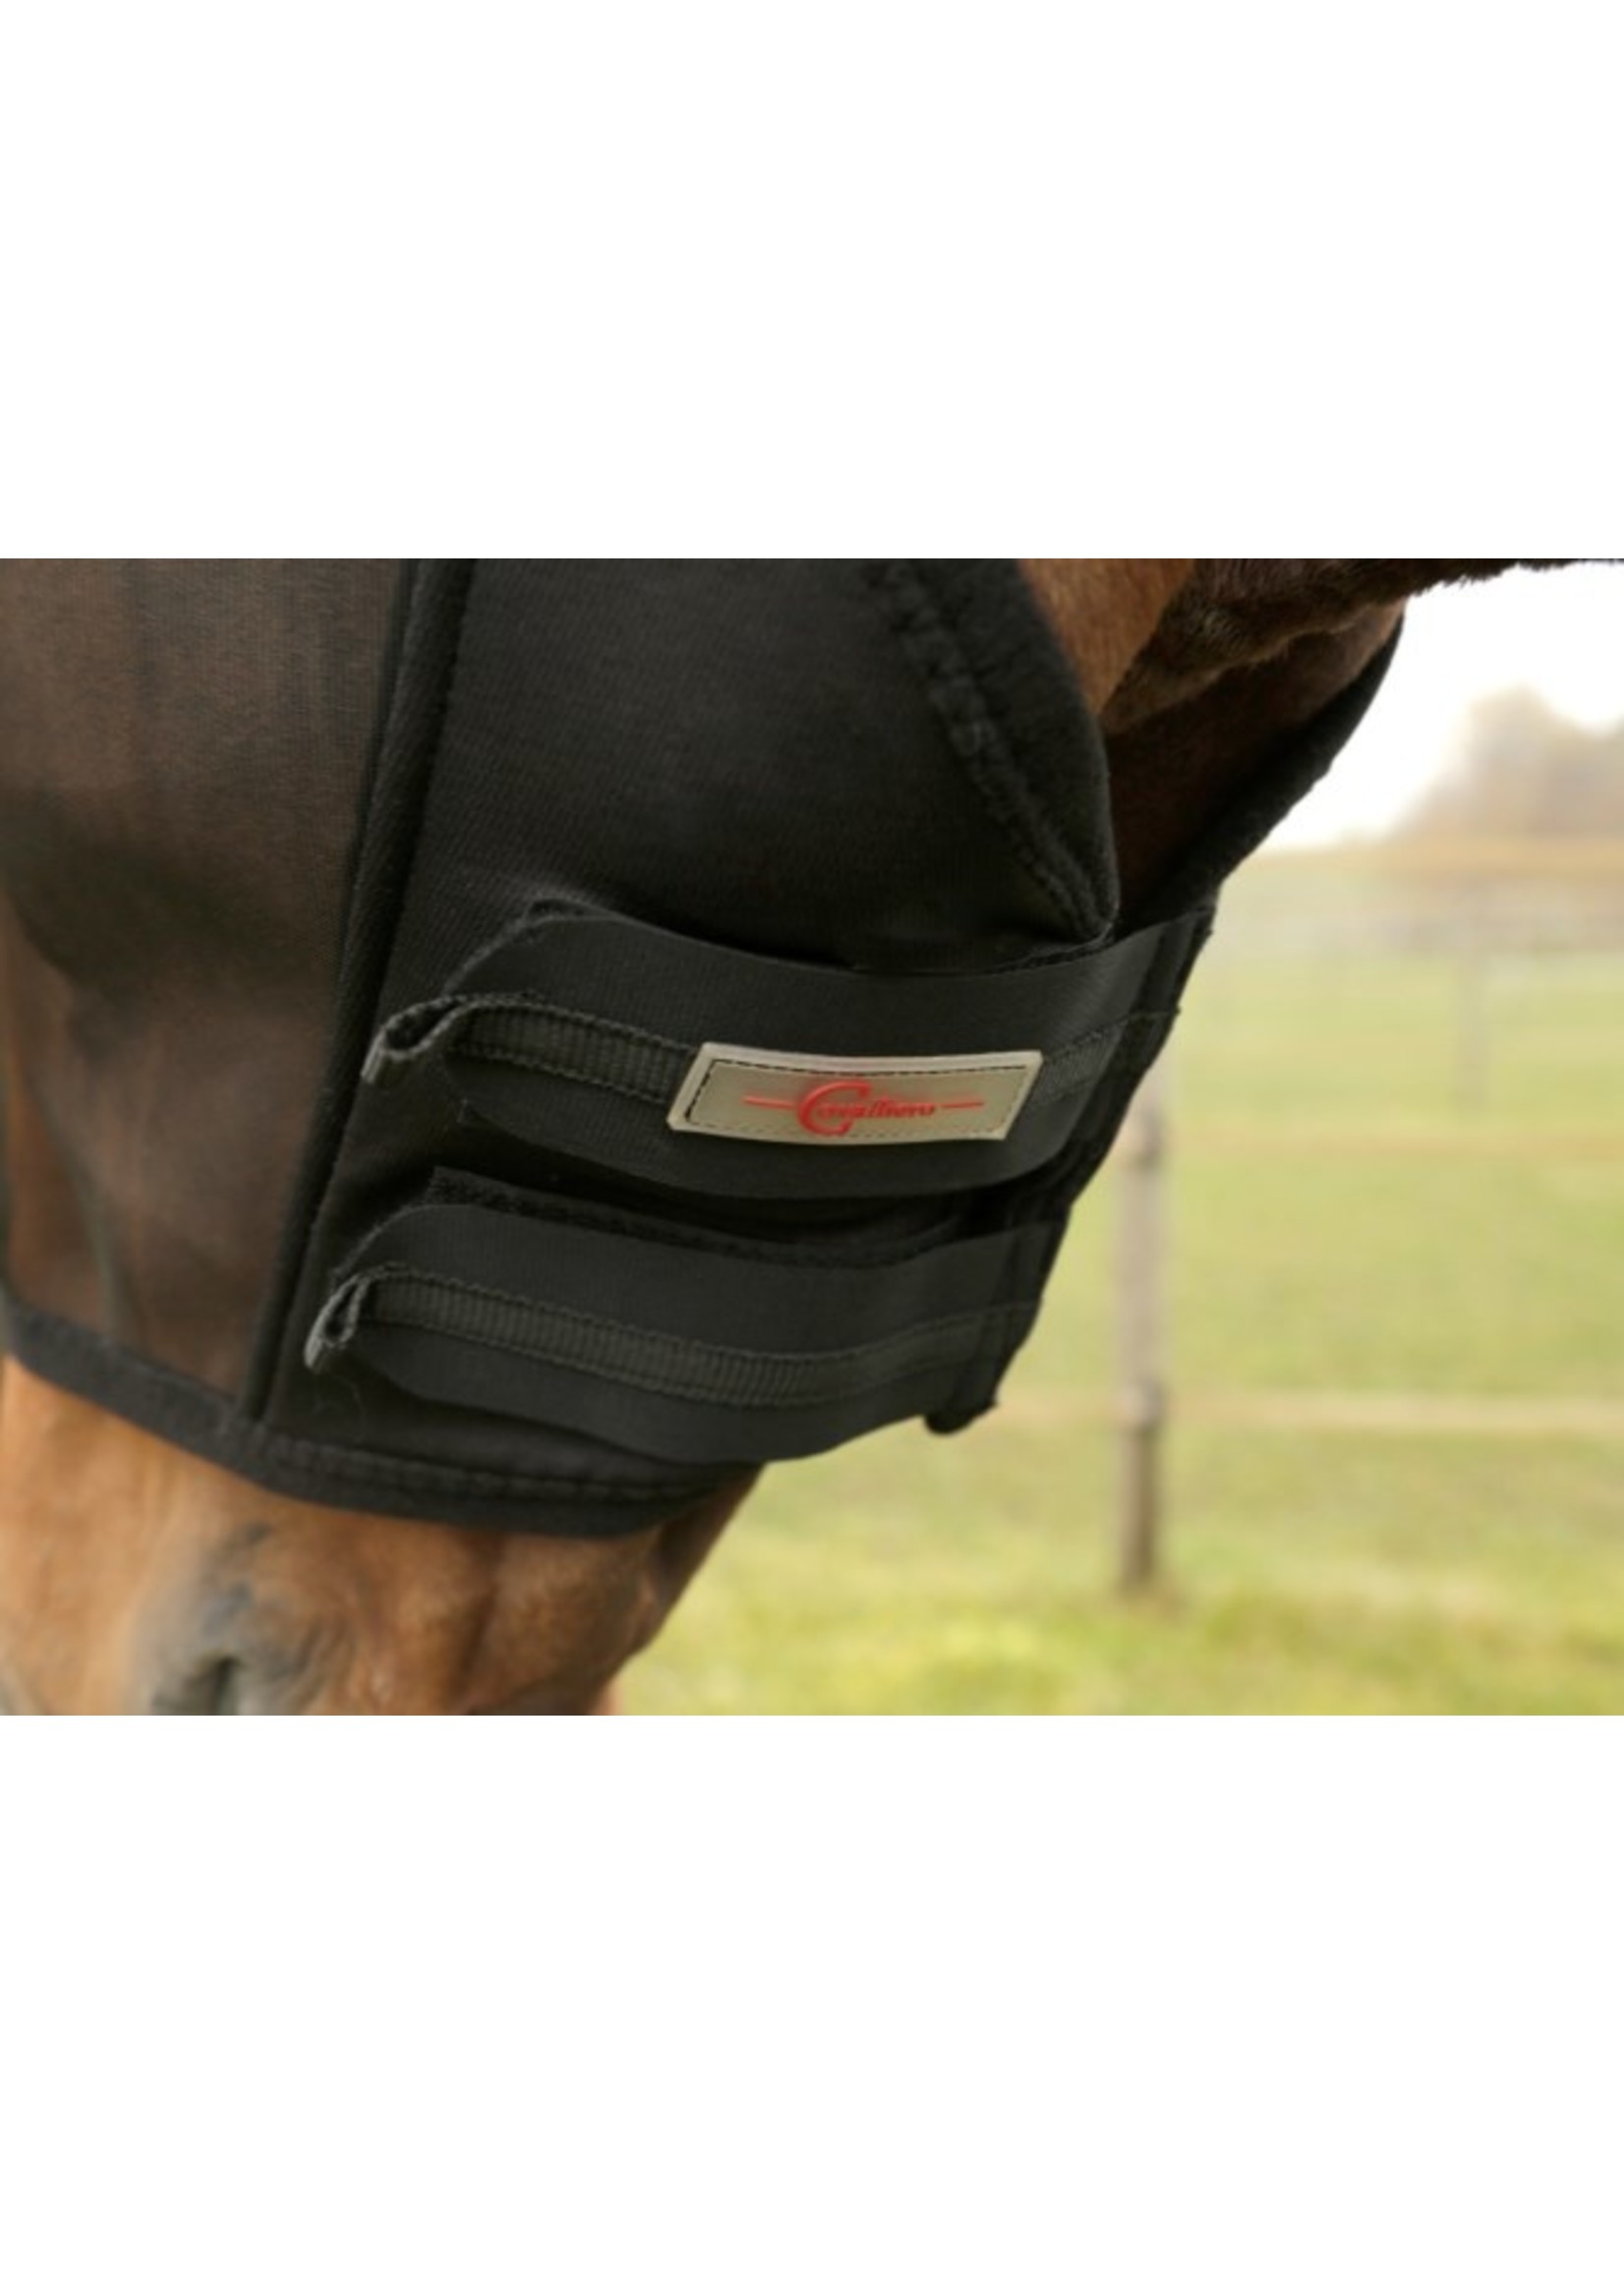 Kerbl Fly mask with cutout